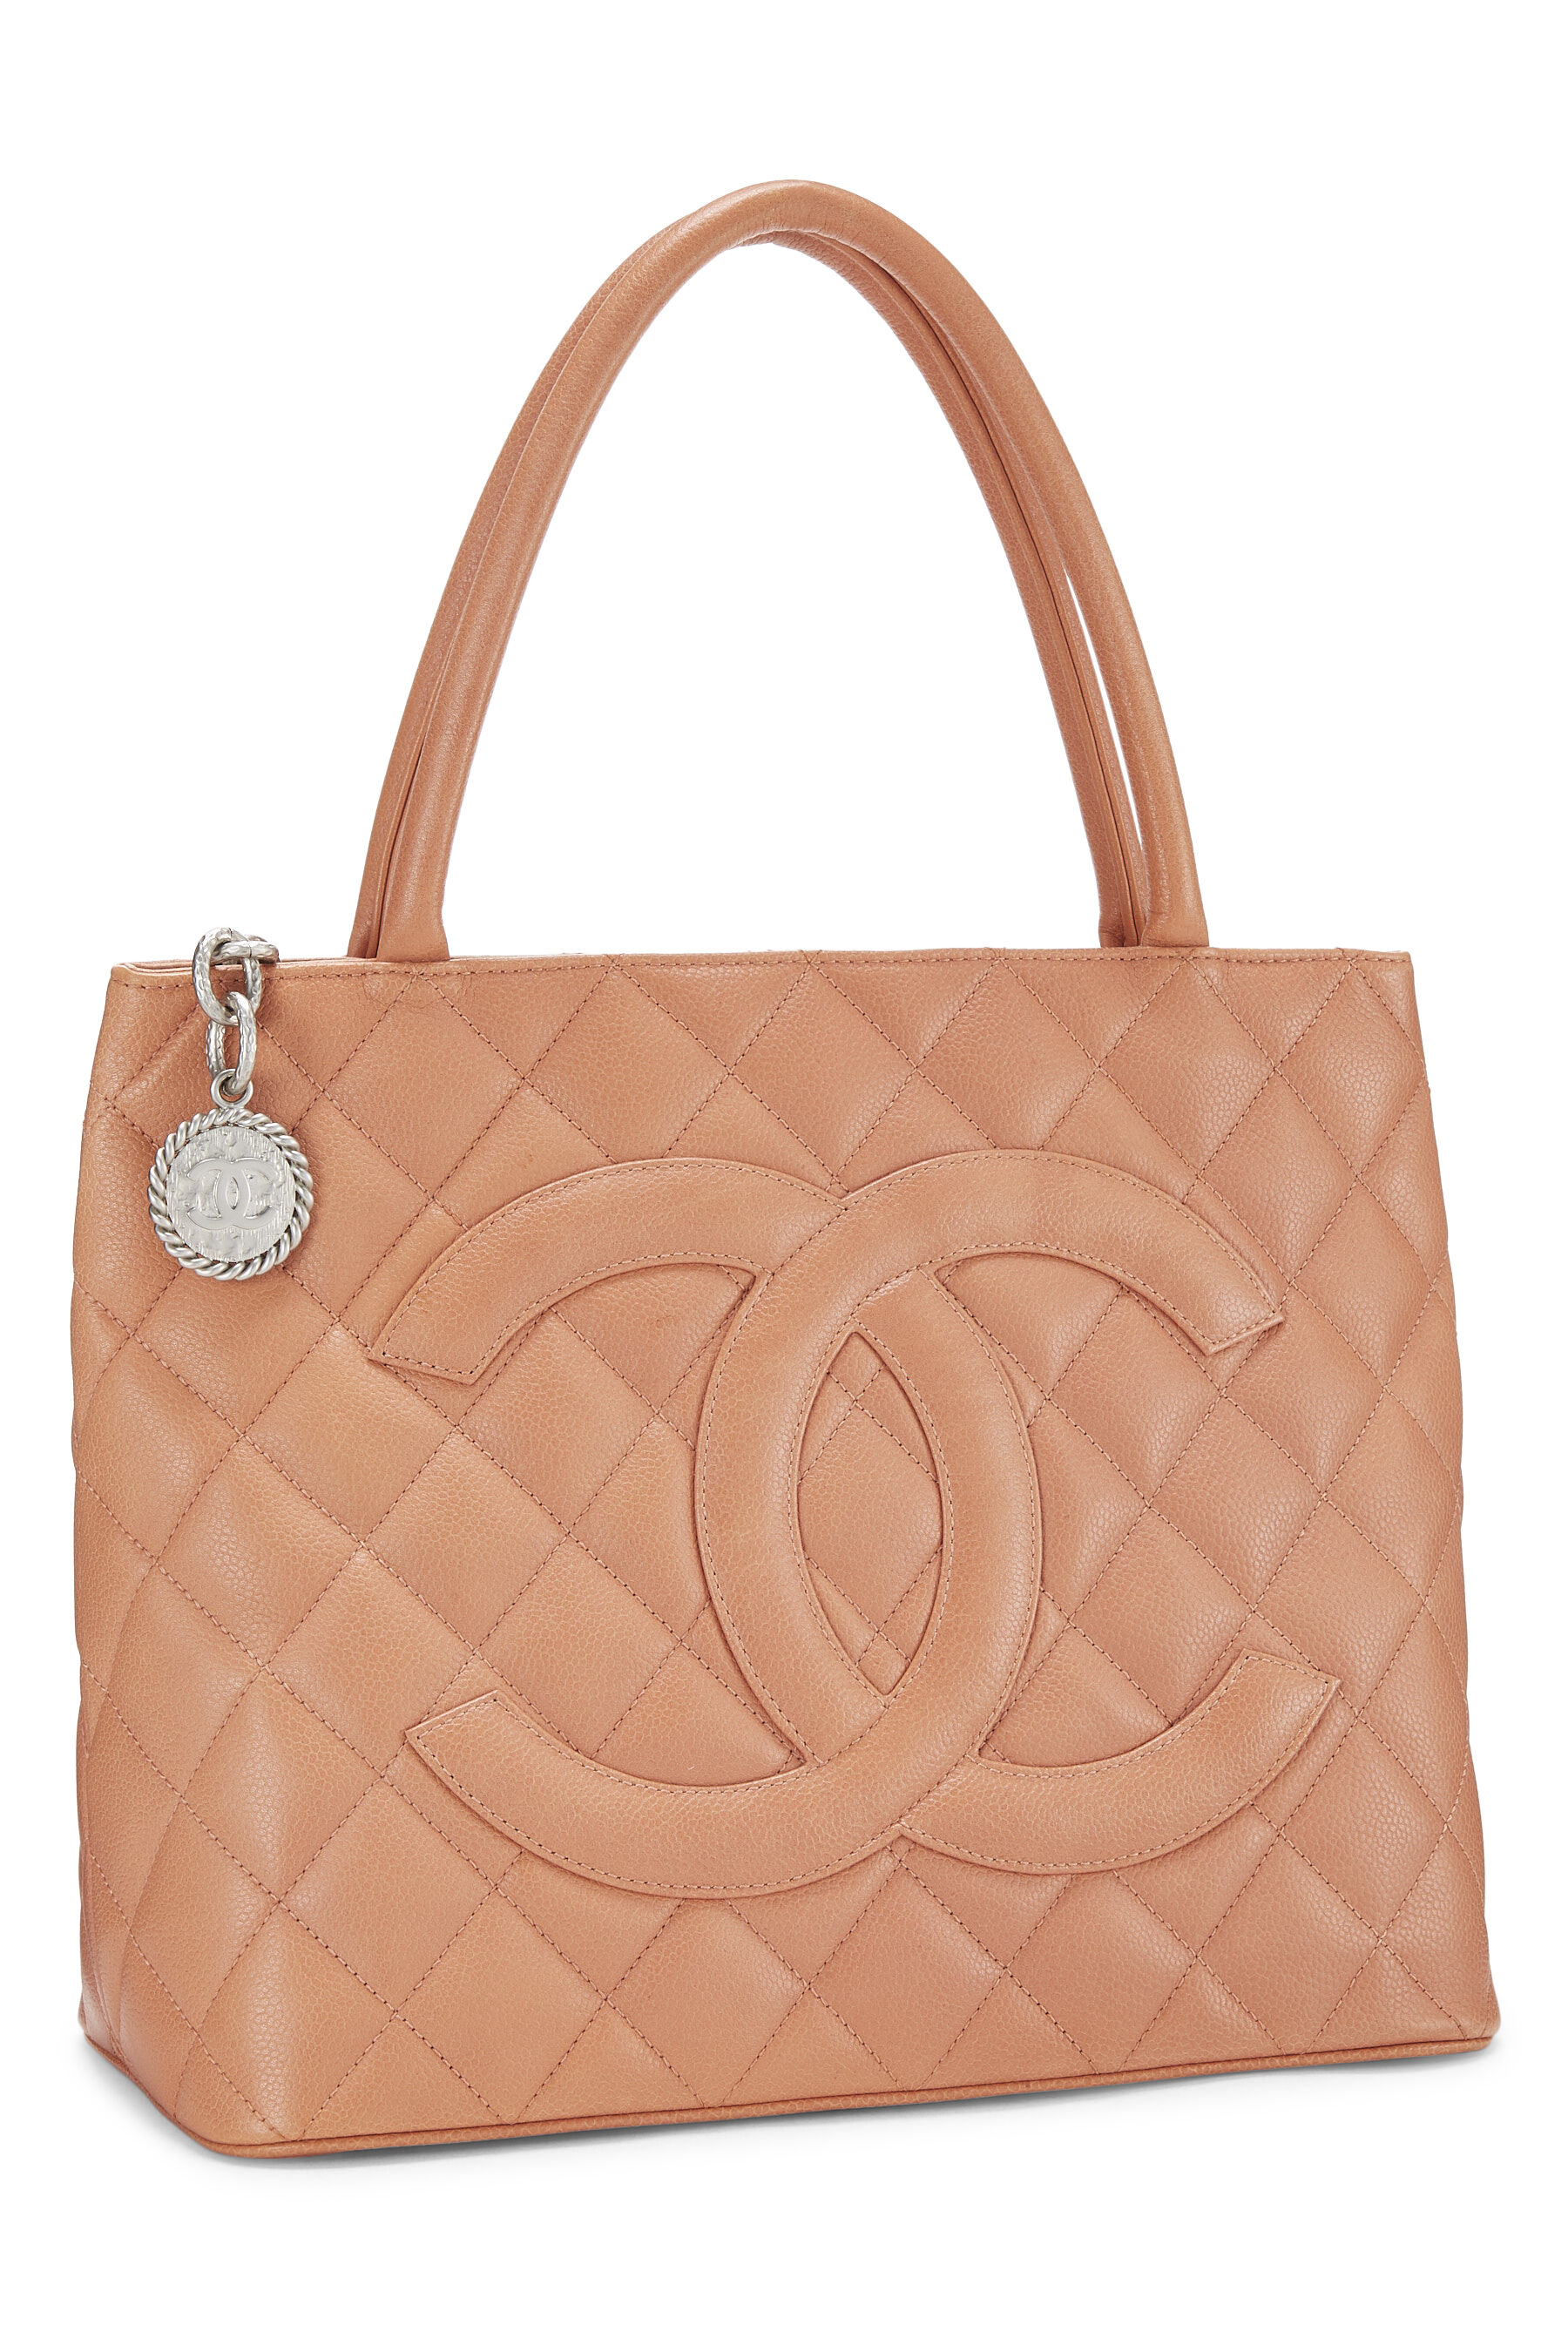 Chanel Coral Quilted Caviar Medallion Tote Q6B02H0FPB082